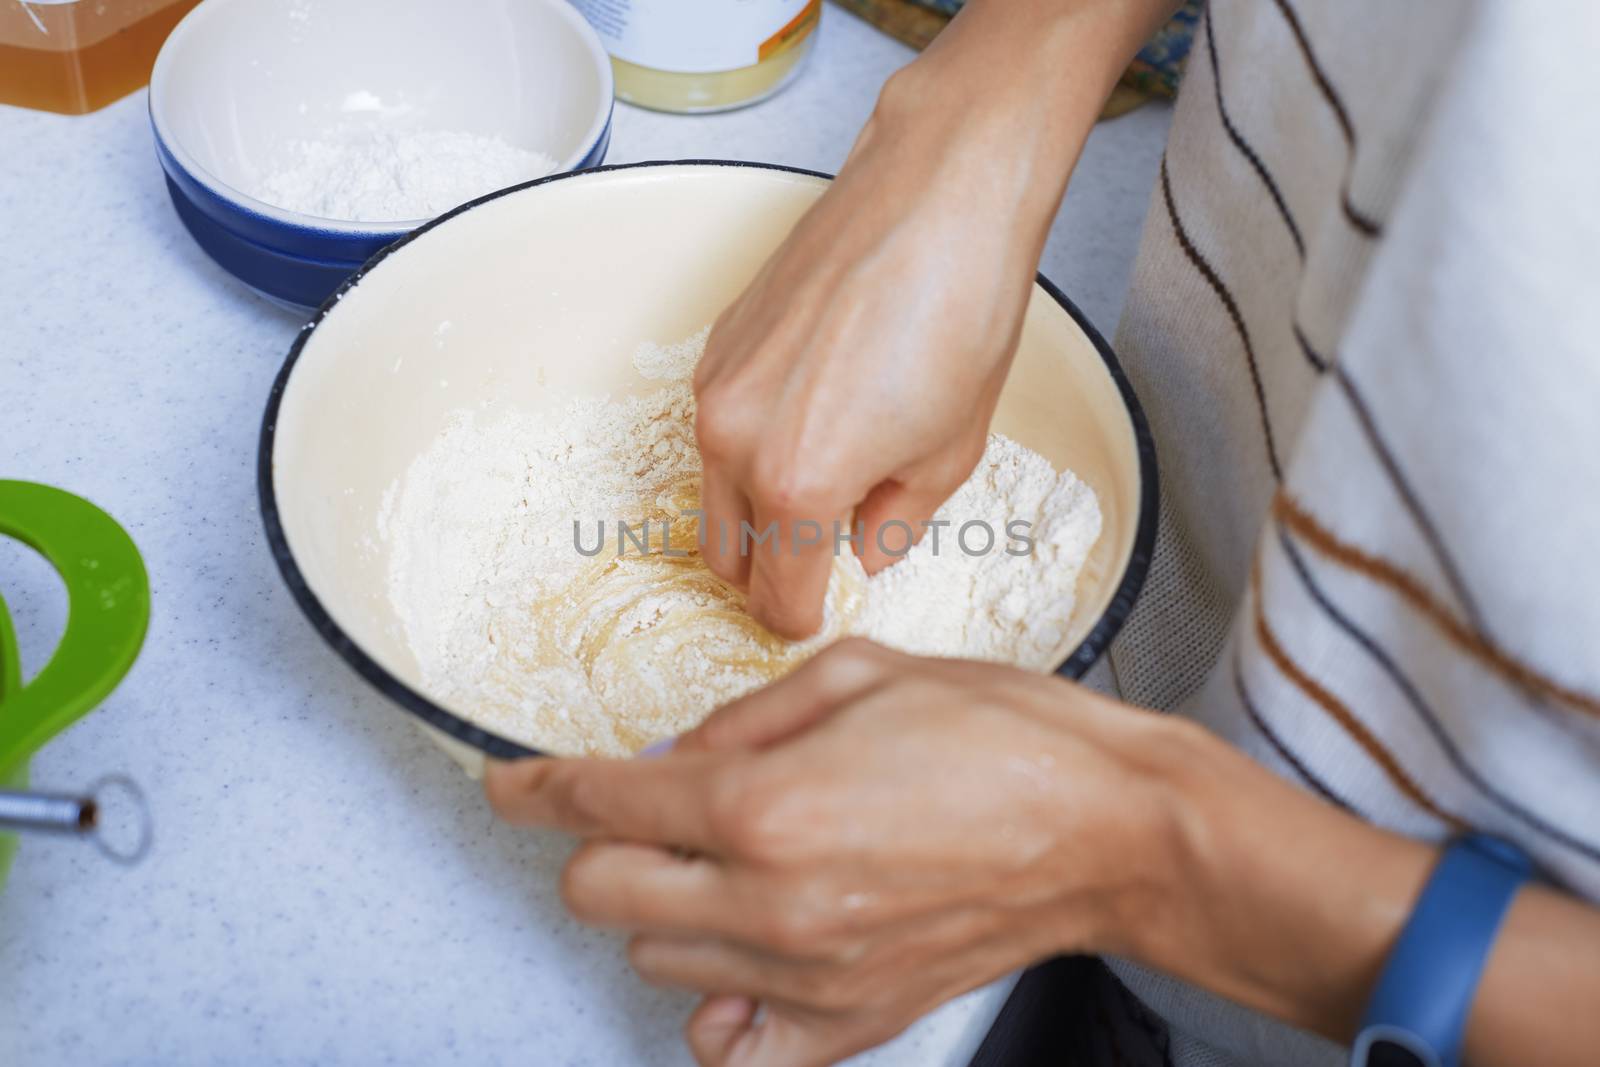 Hands of the woman preparing pie pastry by Novic